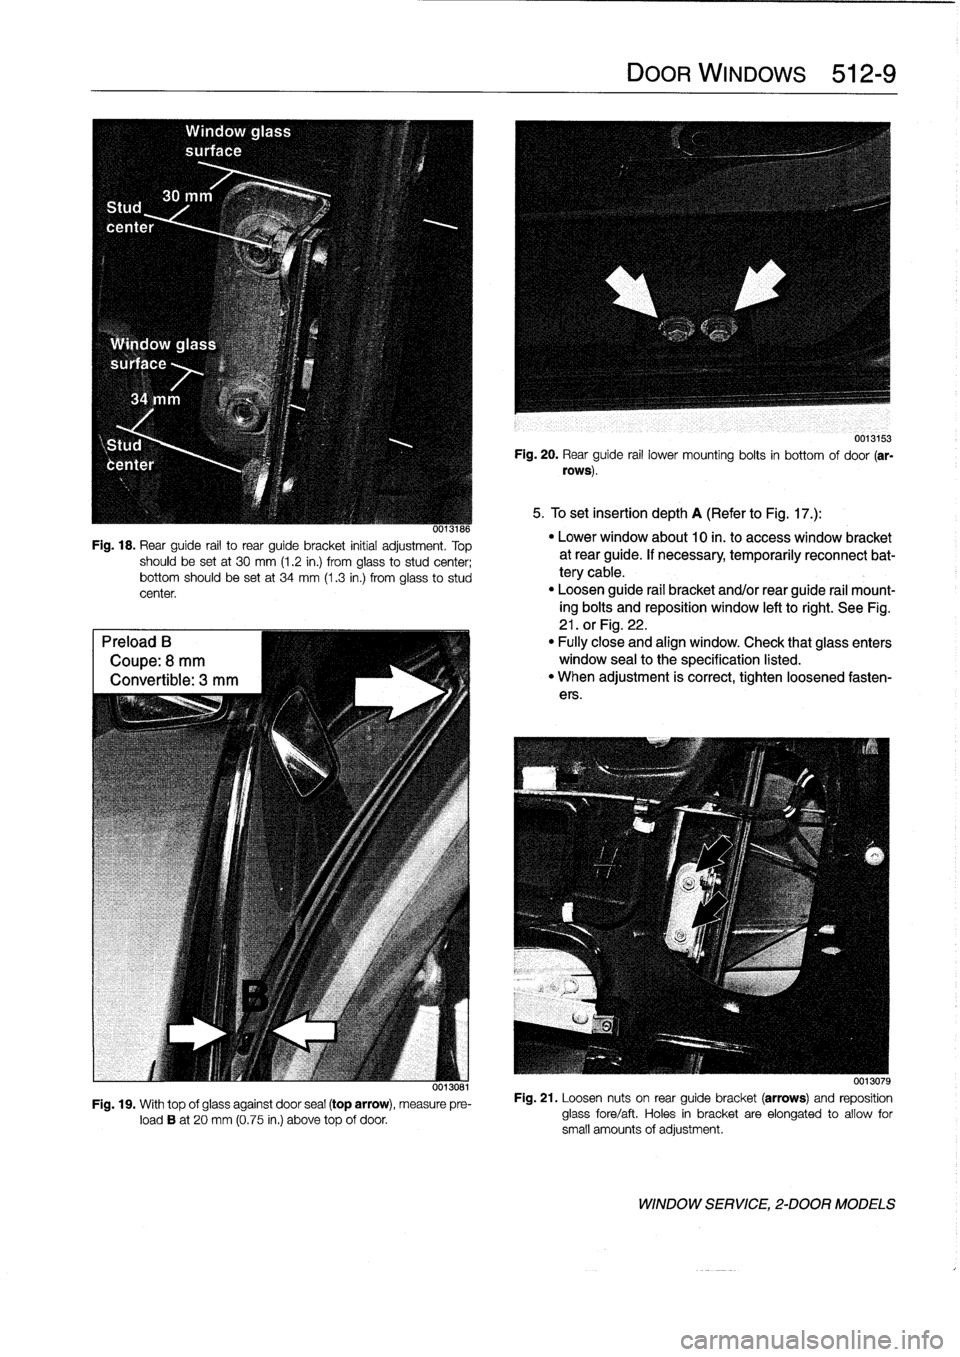 BMW 318i 1997 E36 User Guide 
5tud

center

Window
glass

surface

Fig
.
18
.
Rear
guide
rail
to
rear
guide
bracket
initial
adjustment
.
Top
should
be
setat
30
mm
(1
.2
in
.)
from
glass
to
studcenter
;
bottom
should
be
set
at
34
